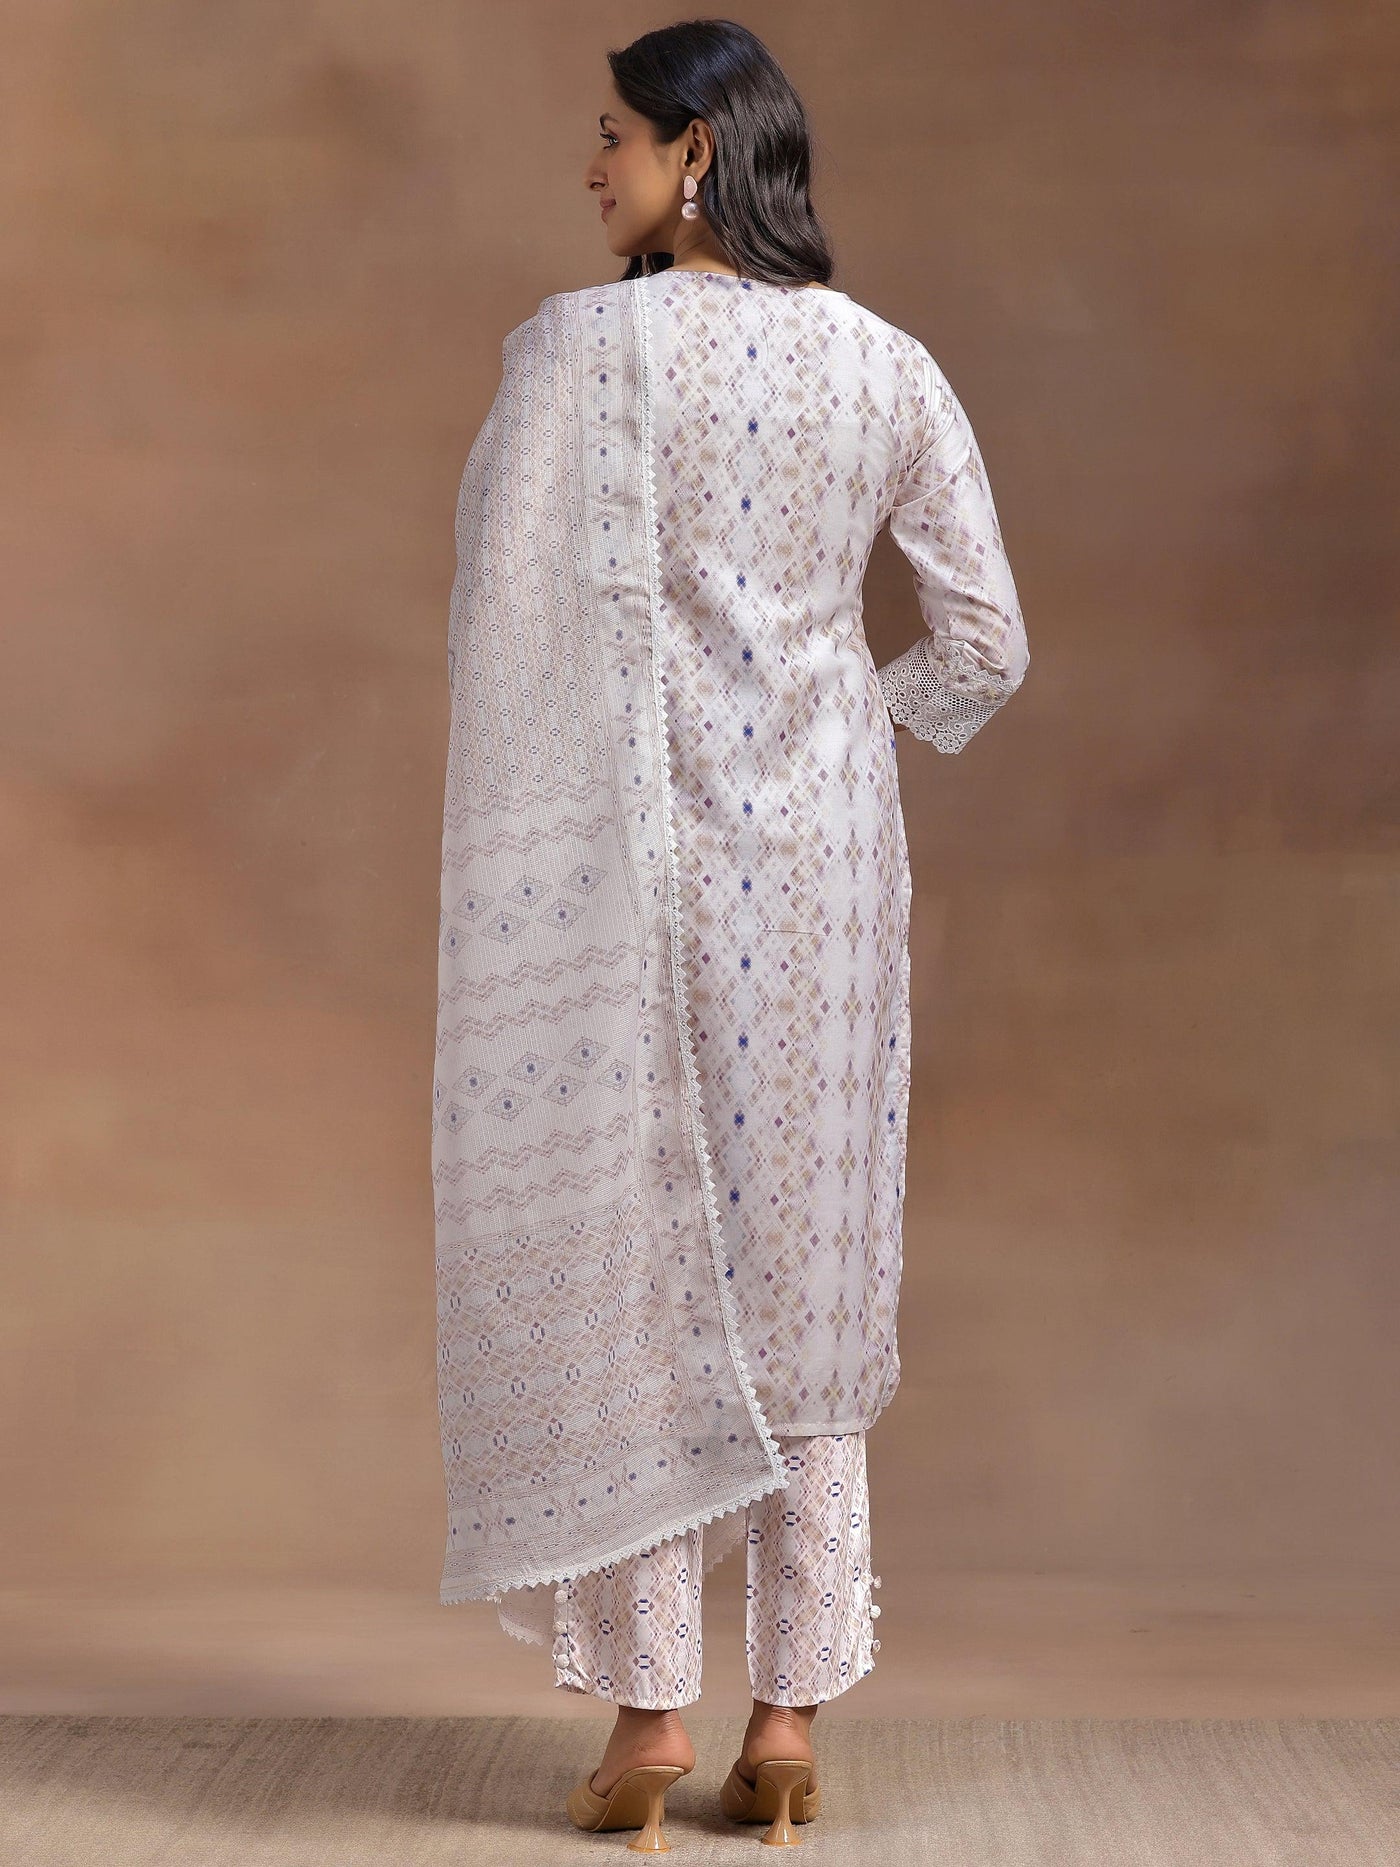 Beige Embroidered Cotton Blend Straight Suit With Dupatta - Libas